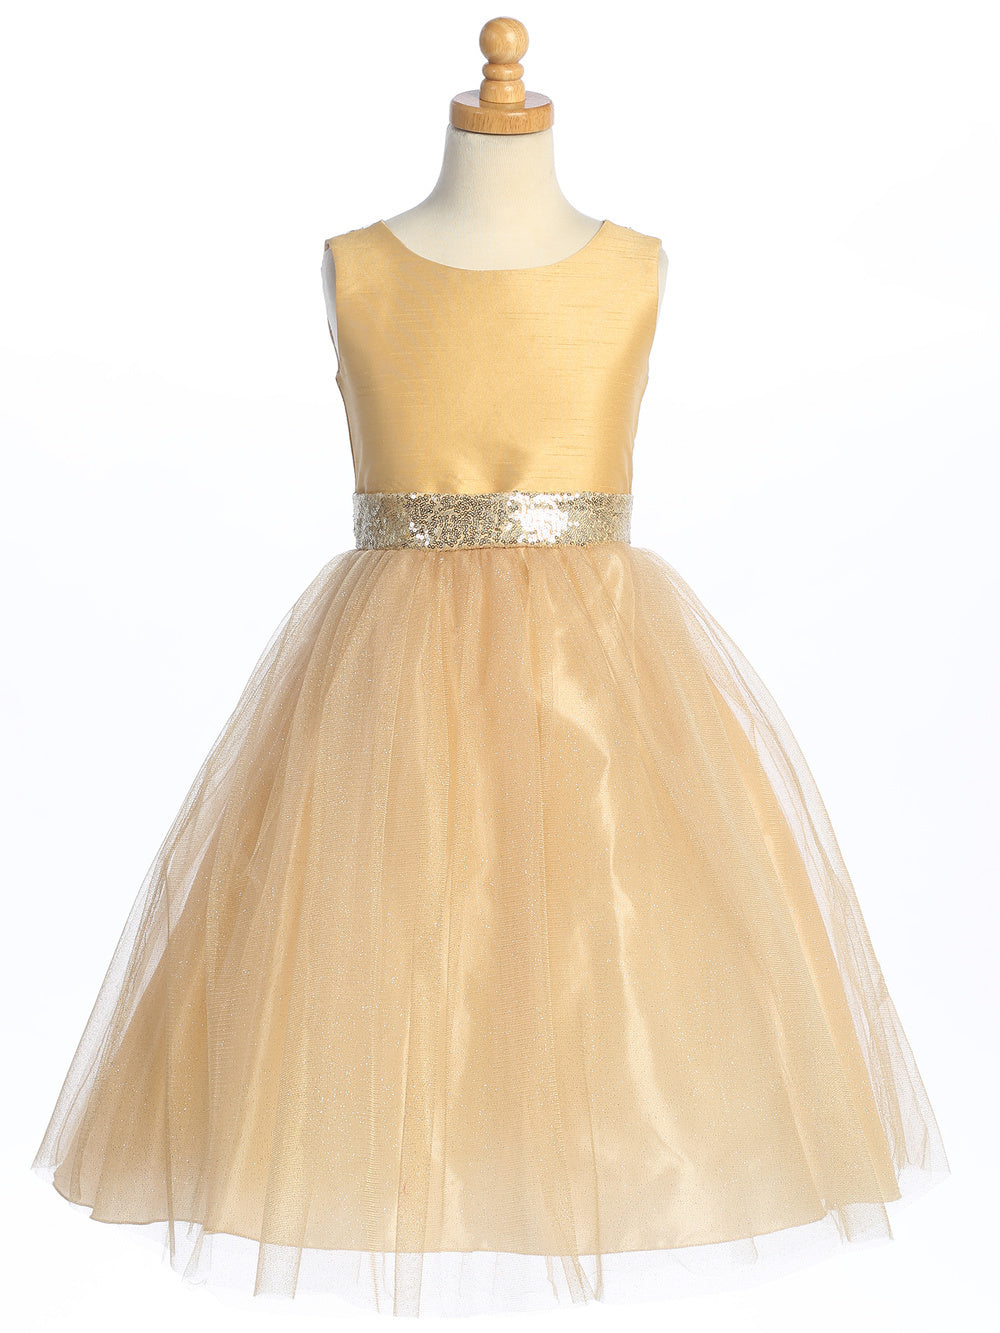 Flower girl stuns in a sequined gold shantung dress with magical sparkle tulle.